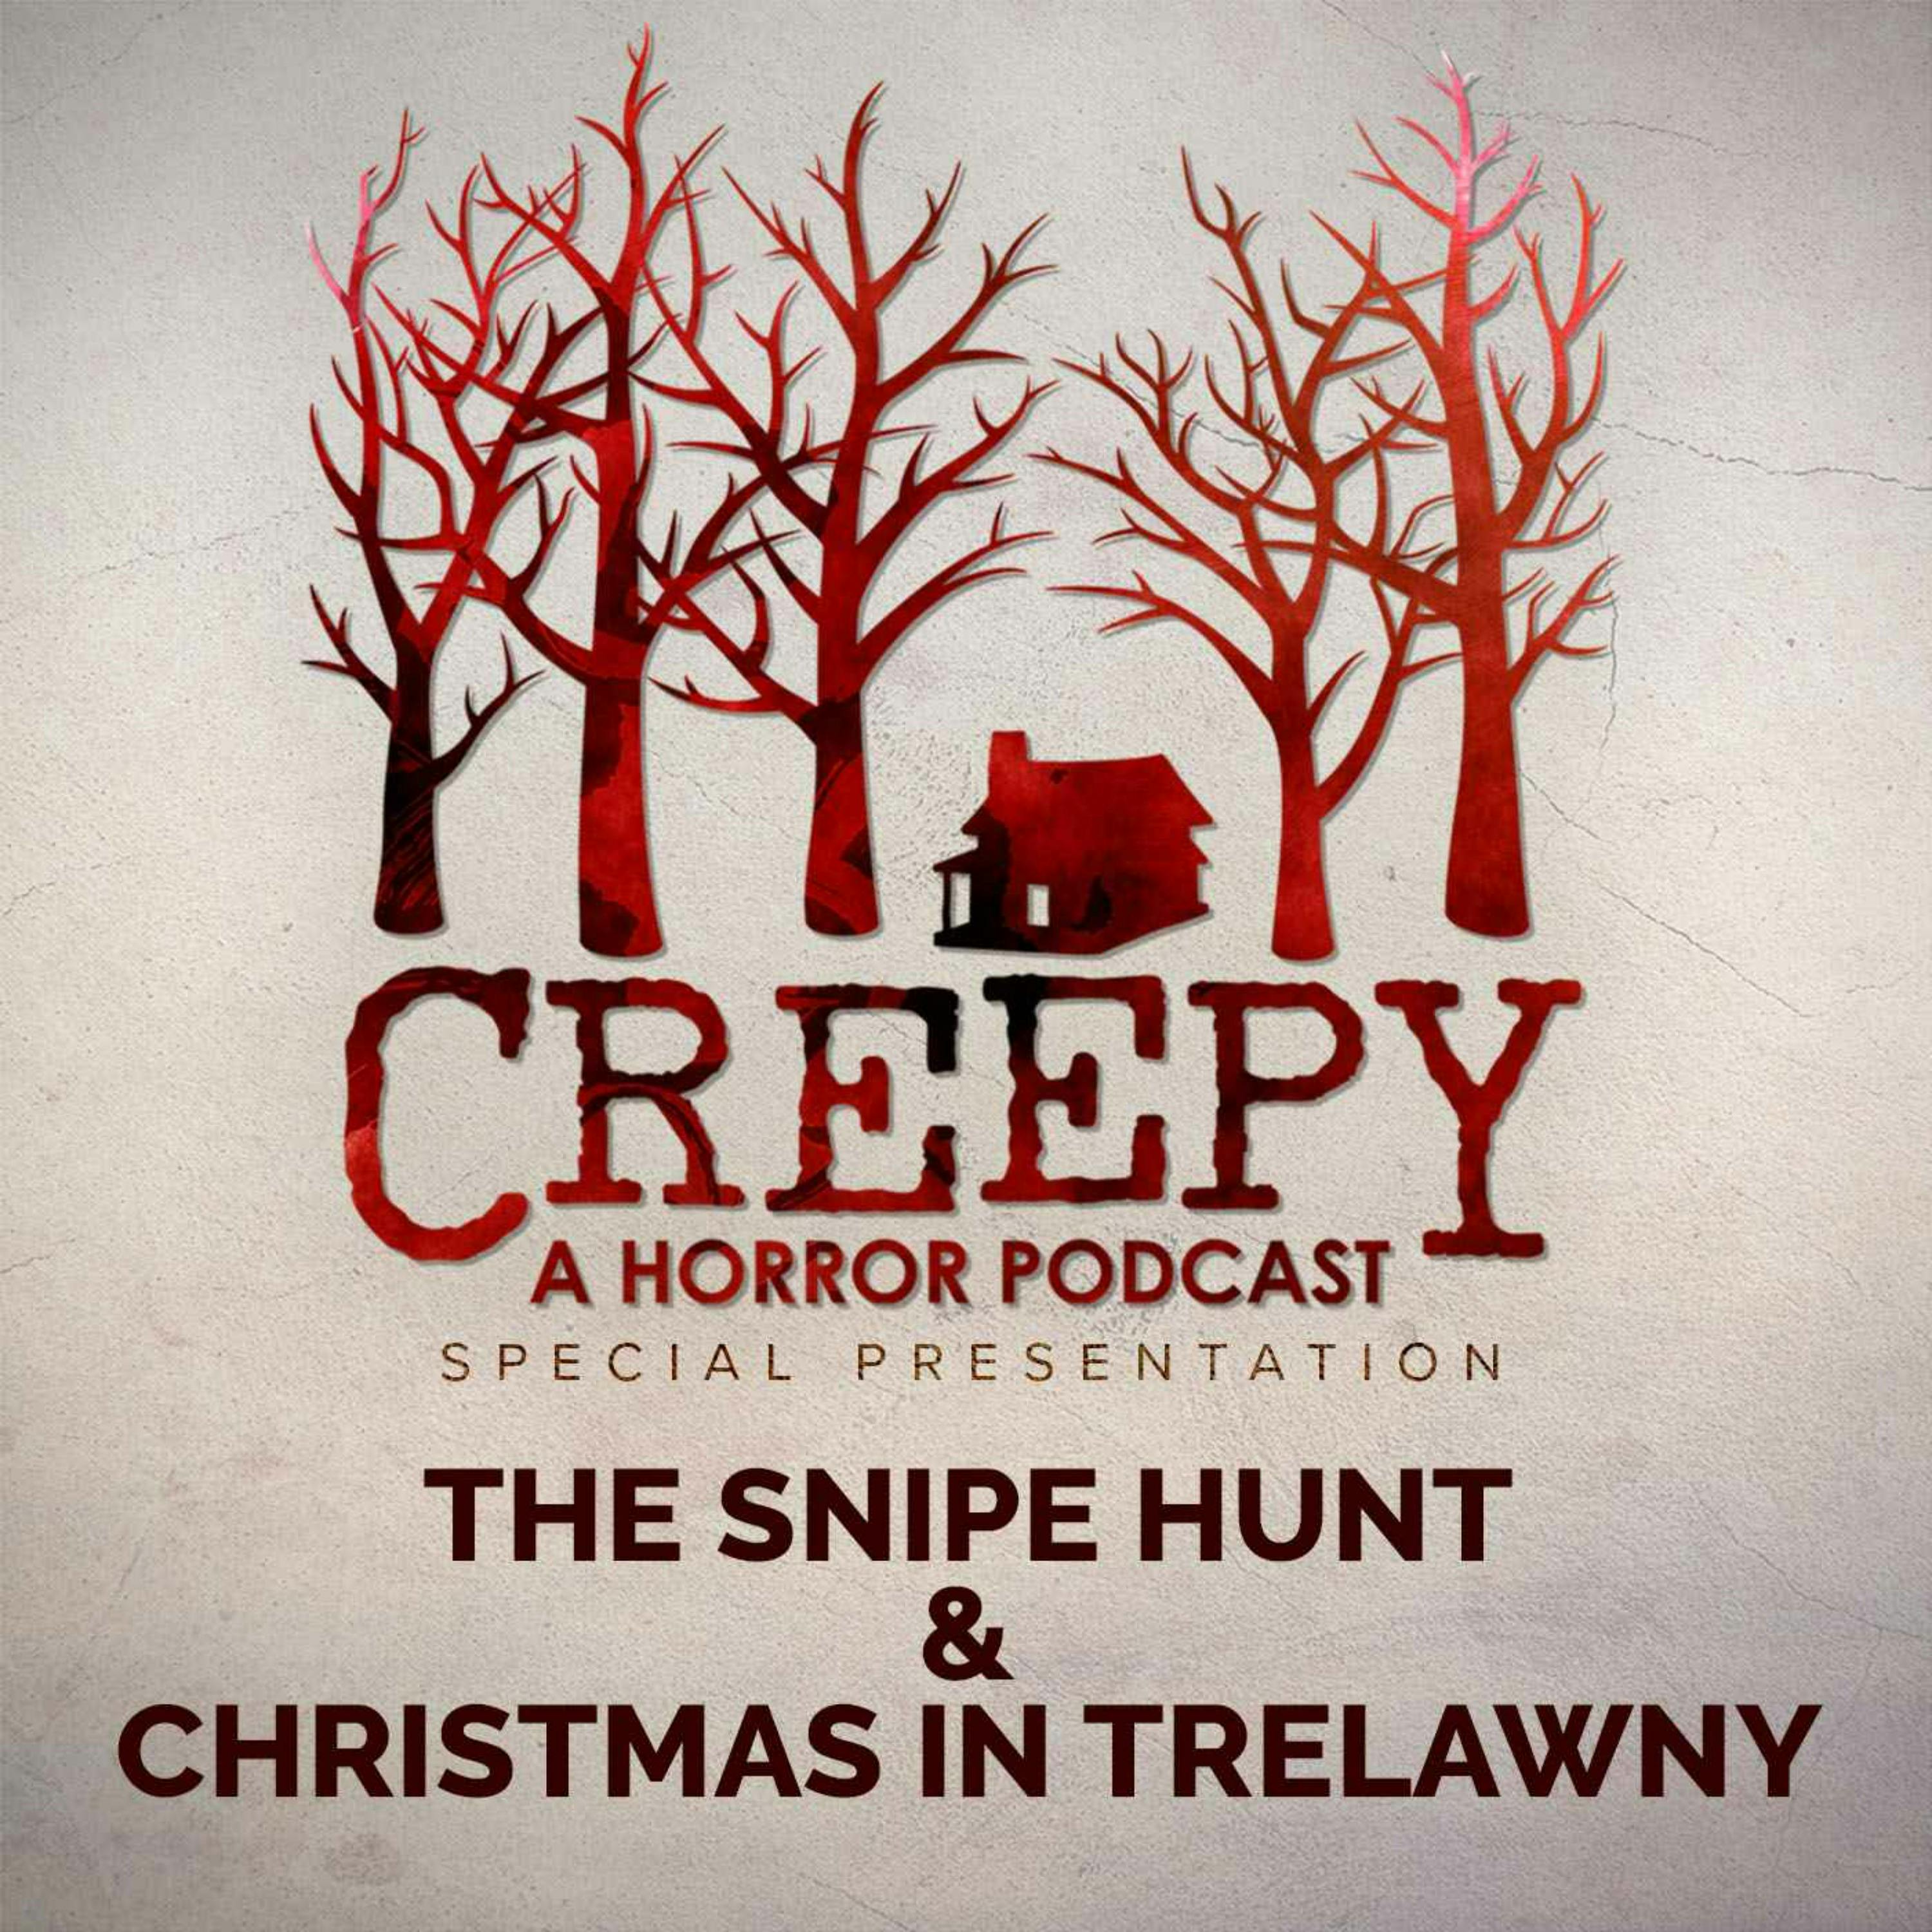 The Snipe Hunt & Christmas in Trelawny